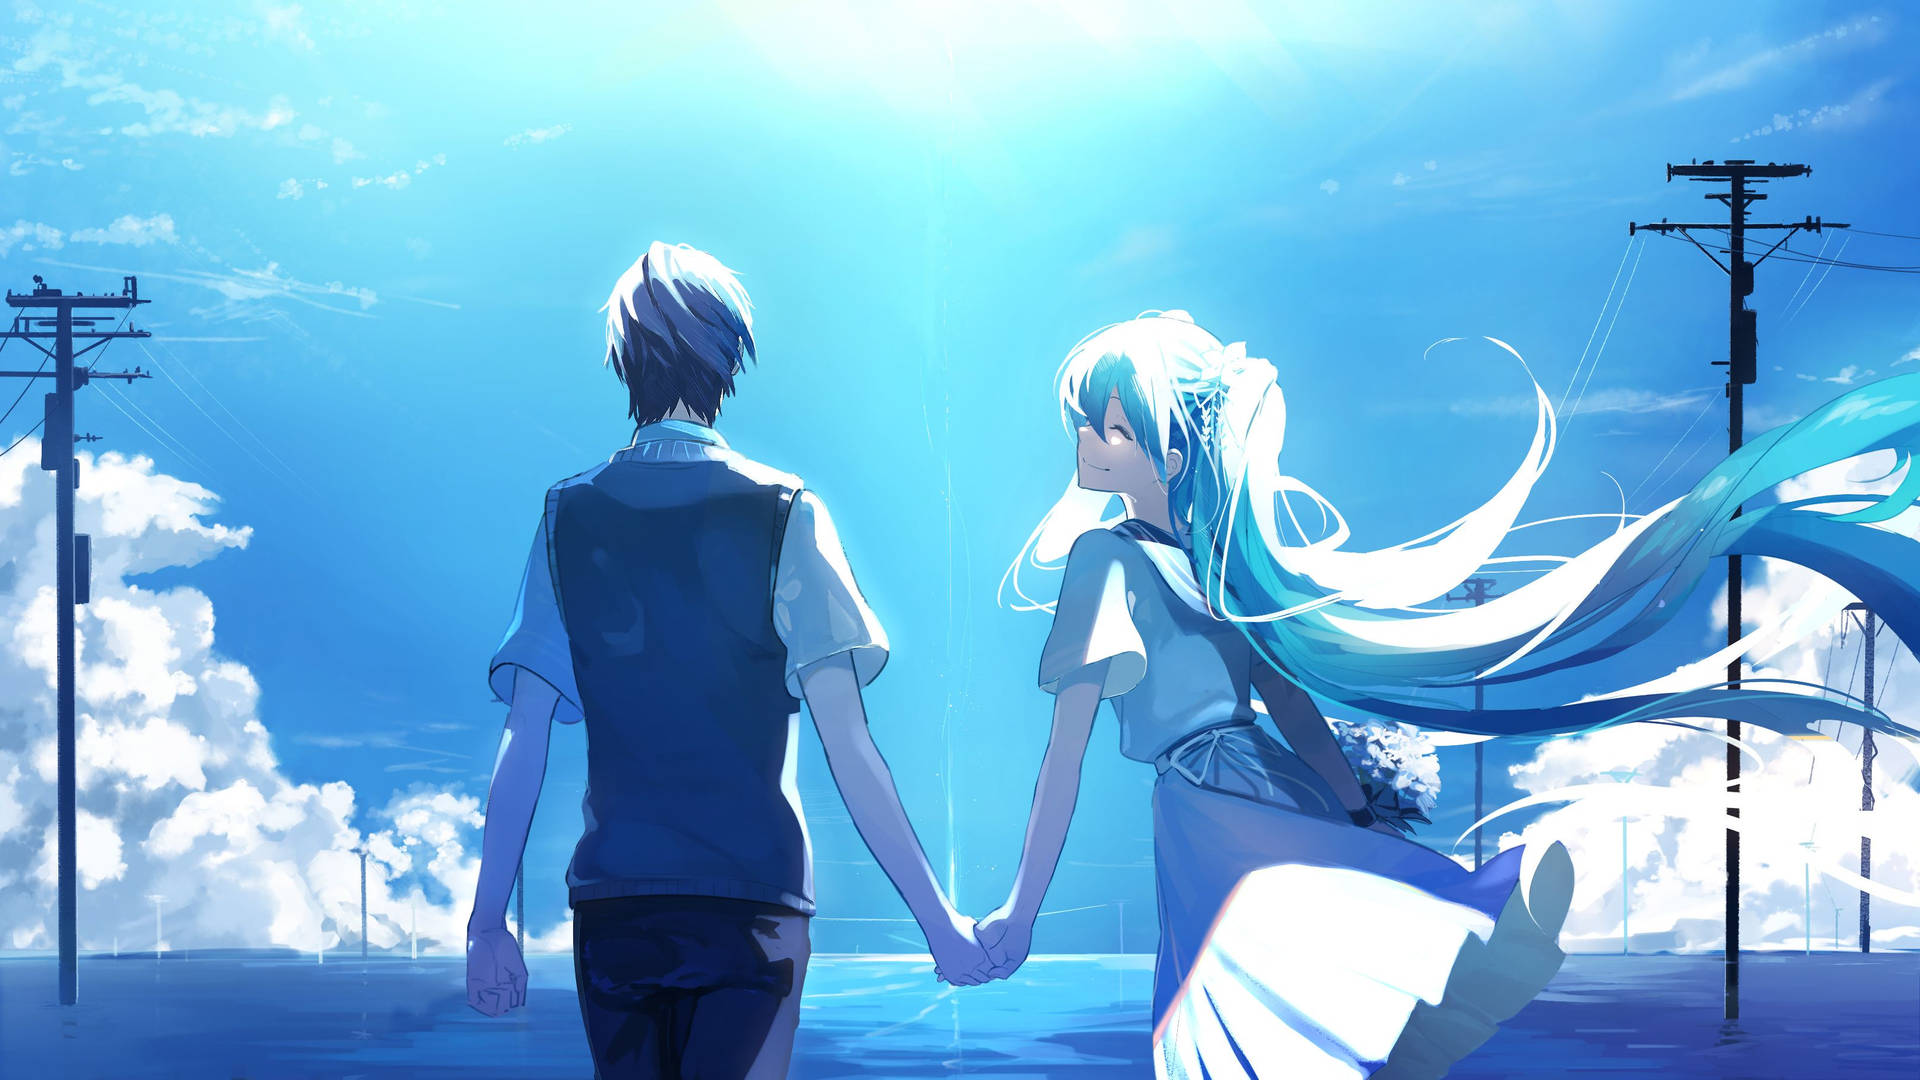 Anime Love Couple Holding Hands